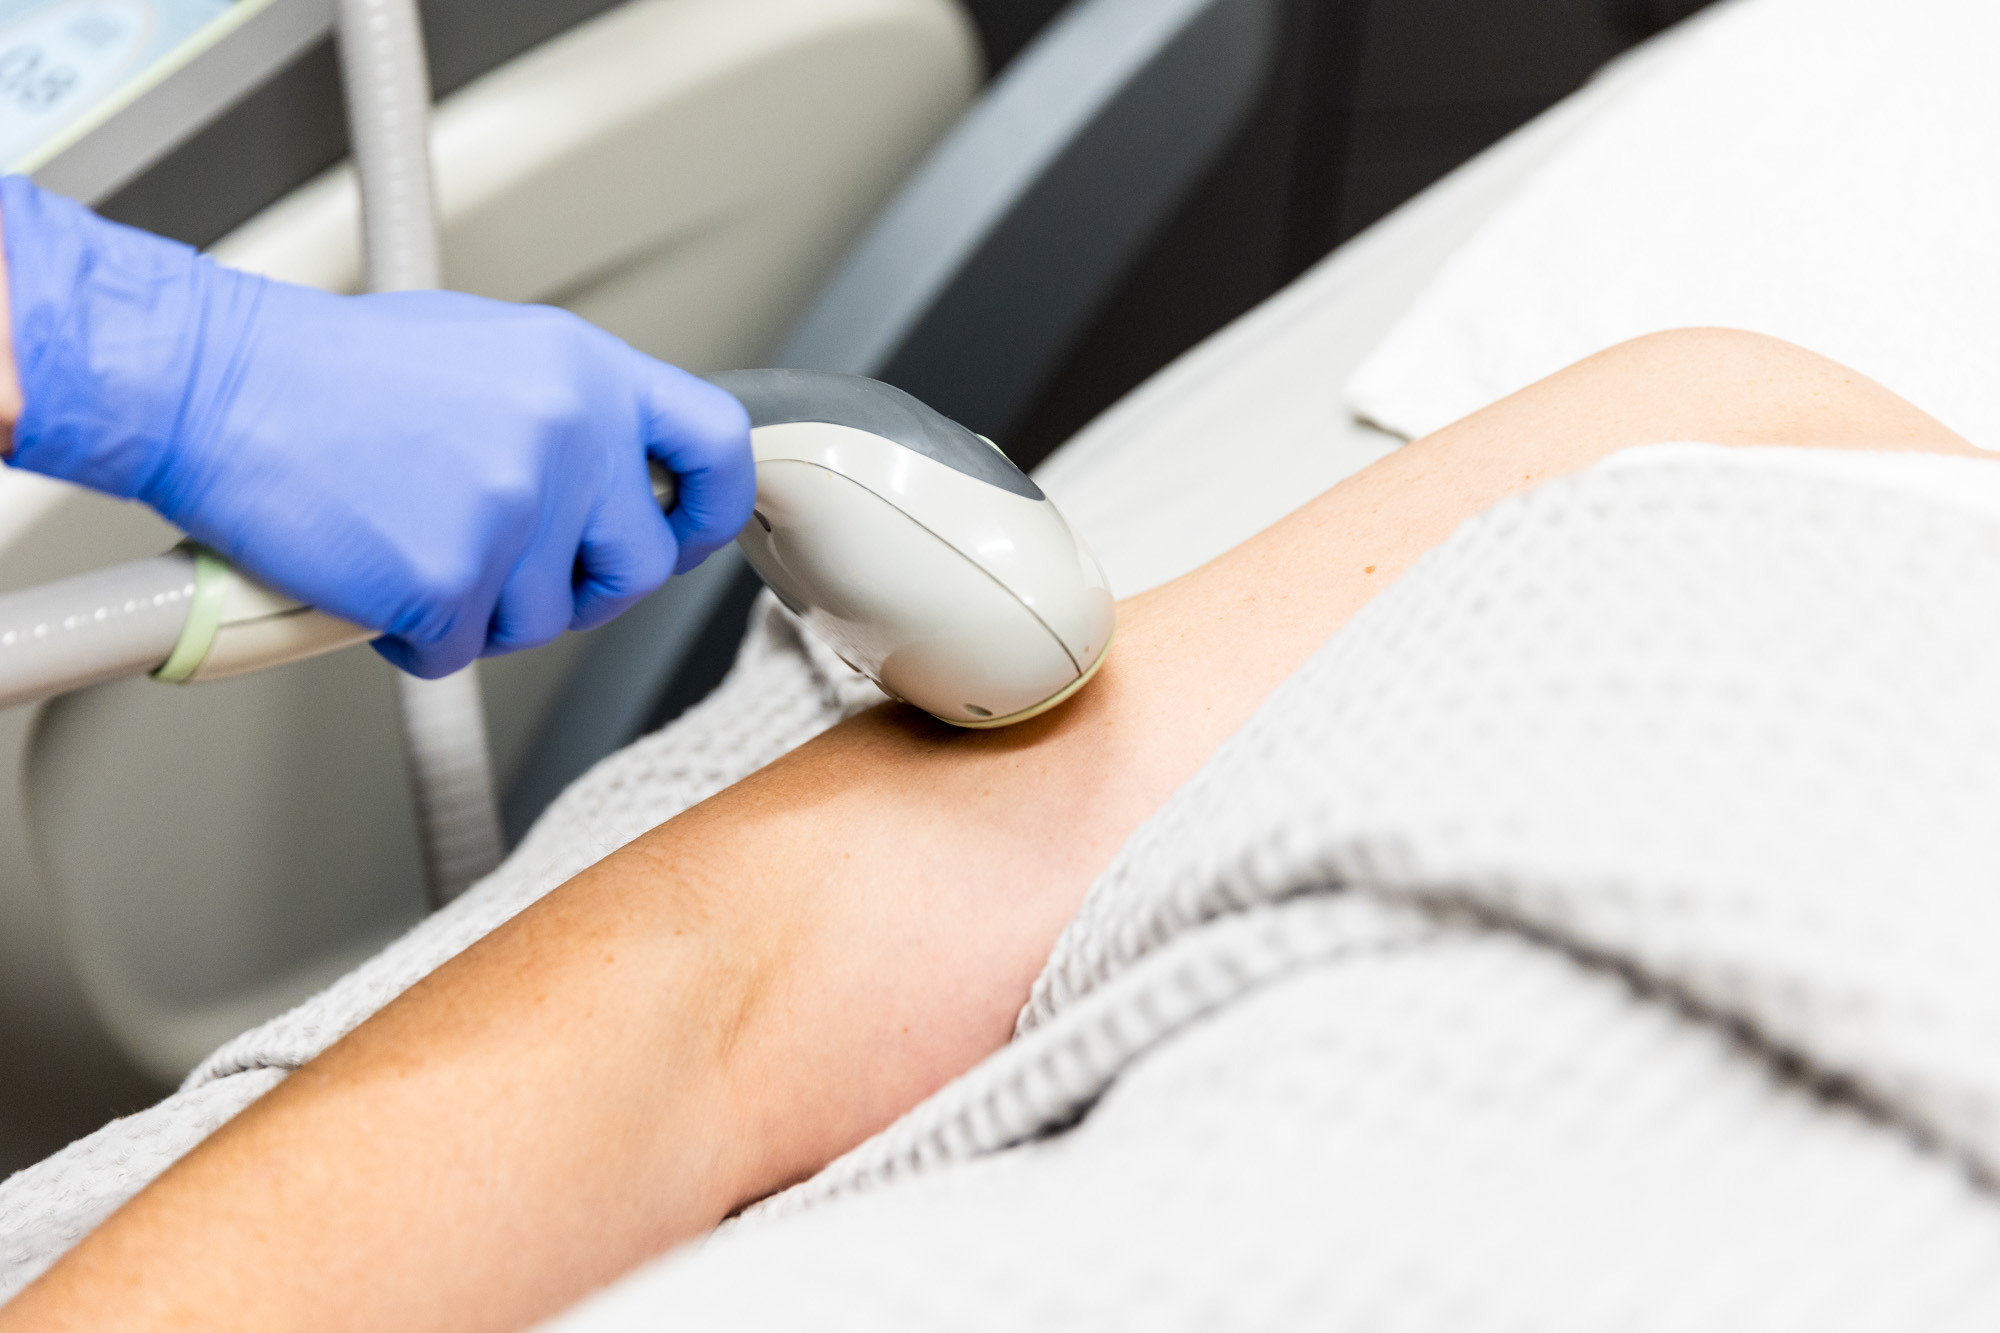 Close up shot of patient's arm. A medical professional's right hand is visible as they use the laser hair removal tool on the patient's upper arm.